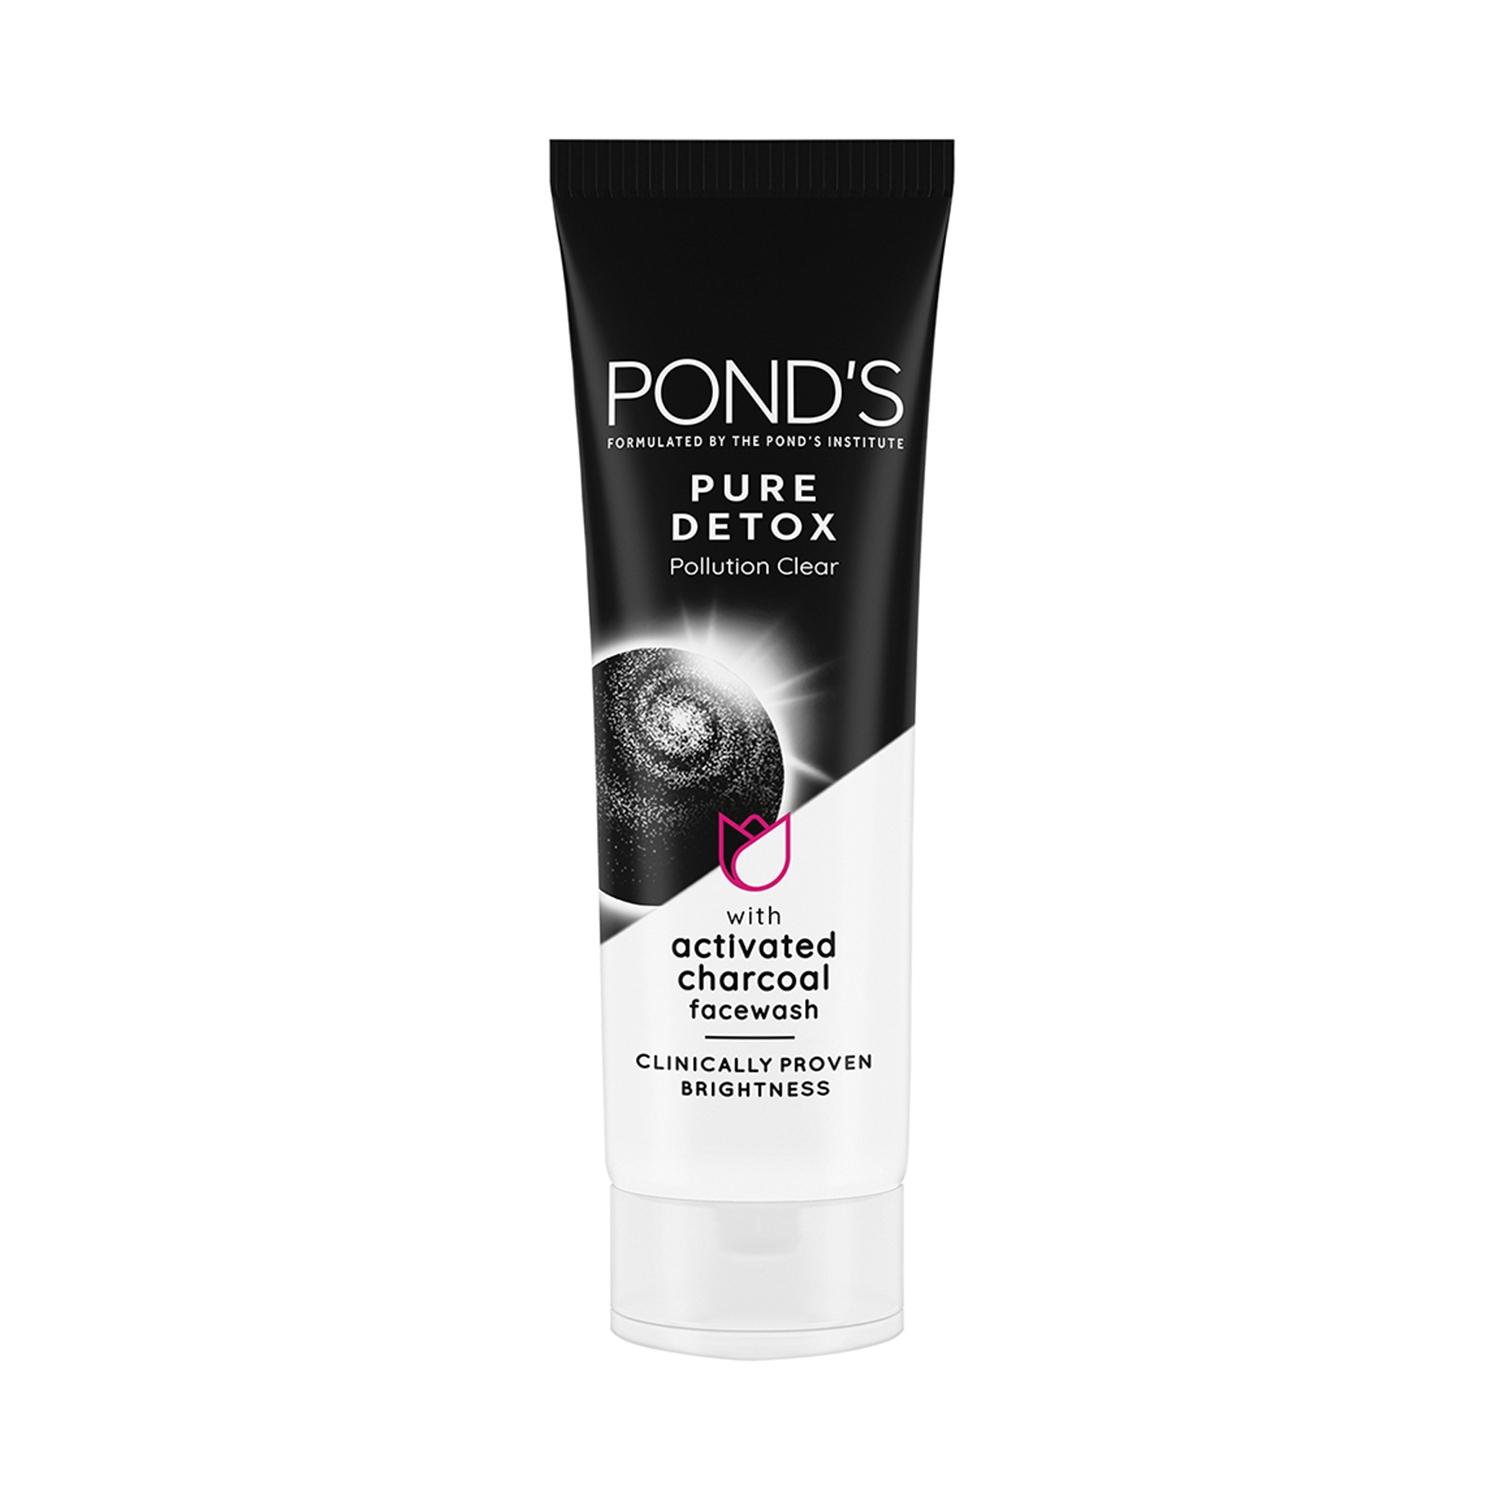 pond's-pure-detox-anti-pollution-purity-face-wash-with-activated-charcoal-(50g)